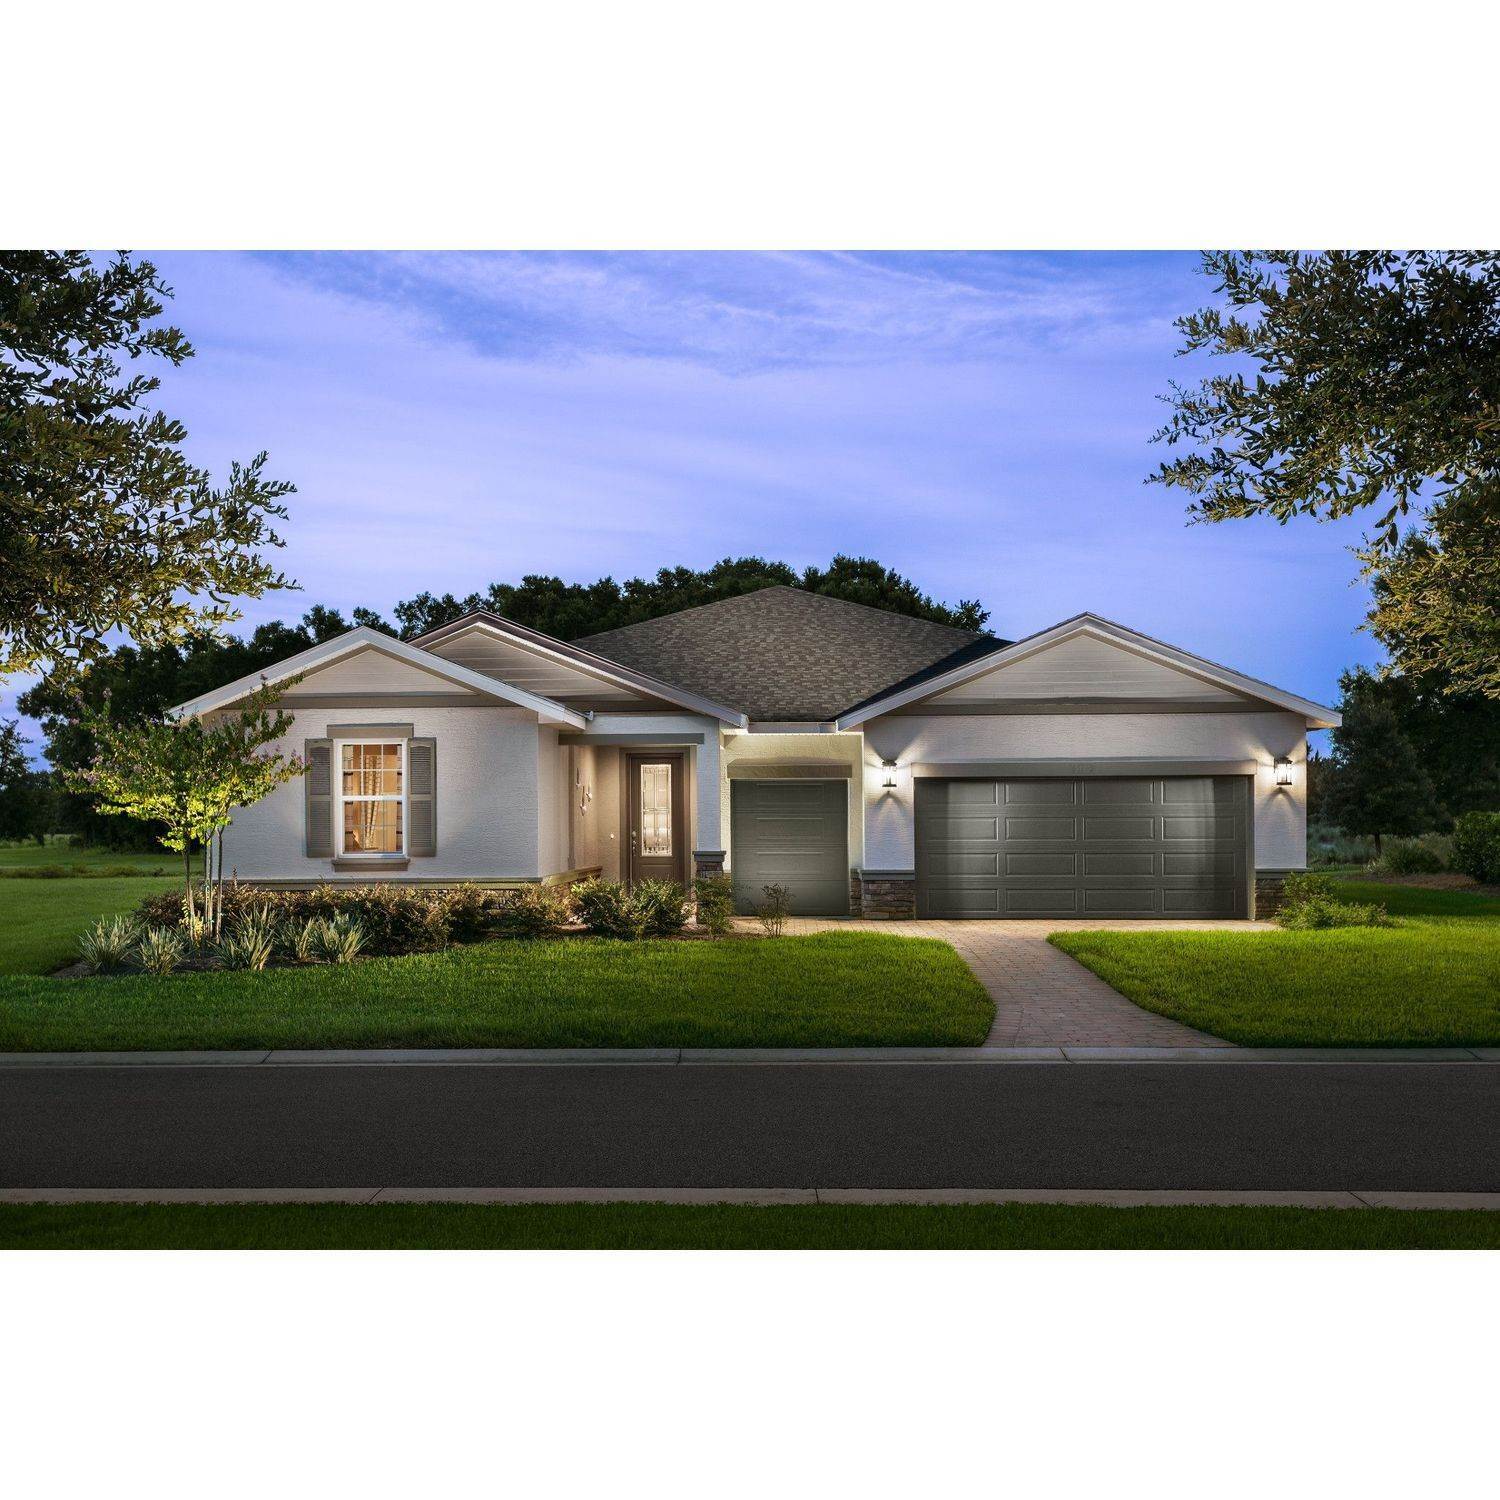 Single Family for Sale at Ocala, FL 34482